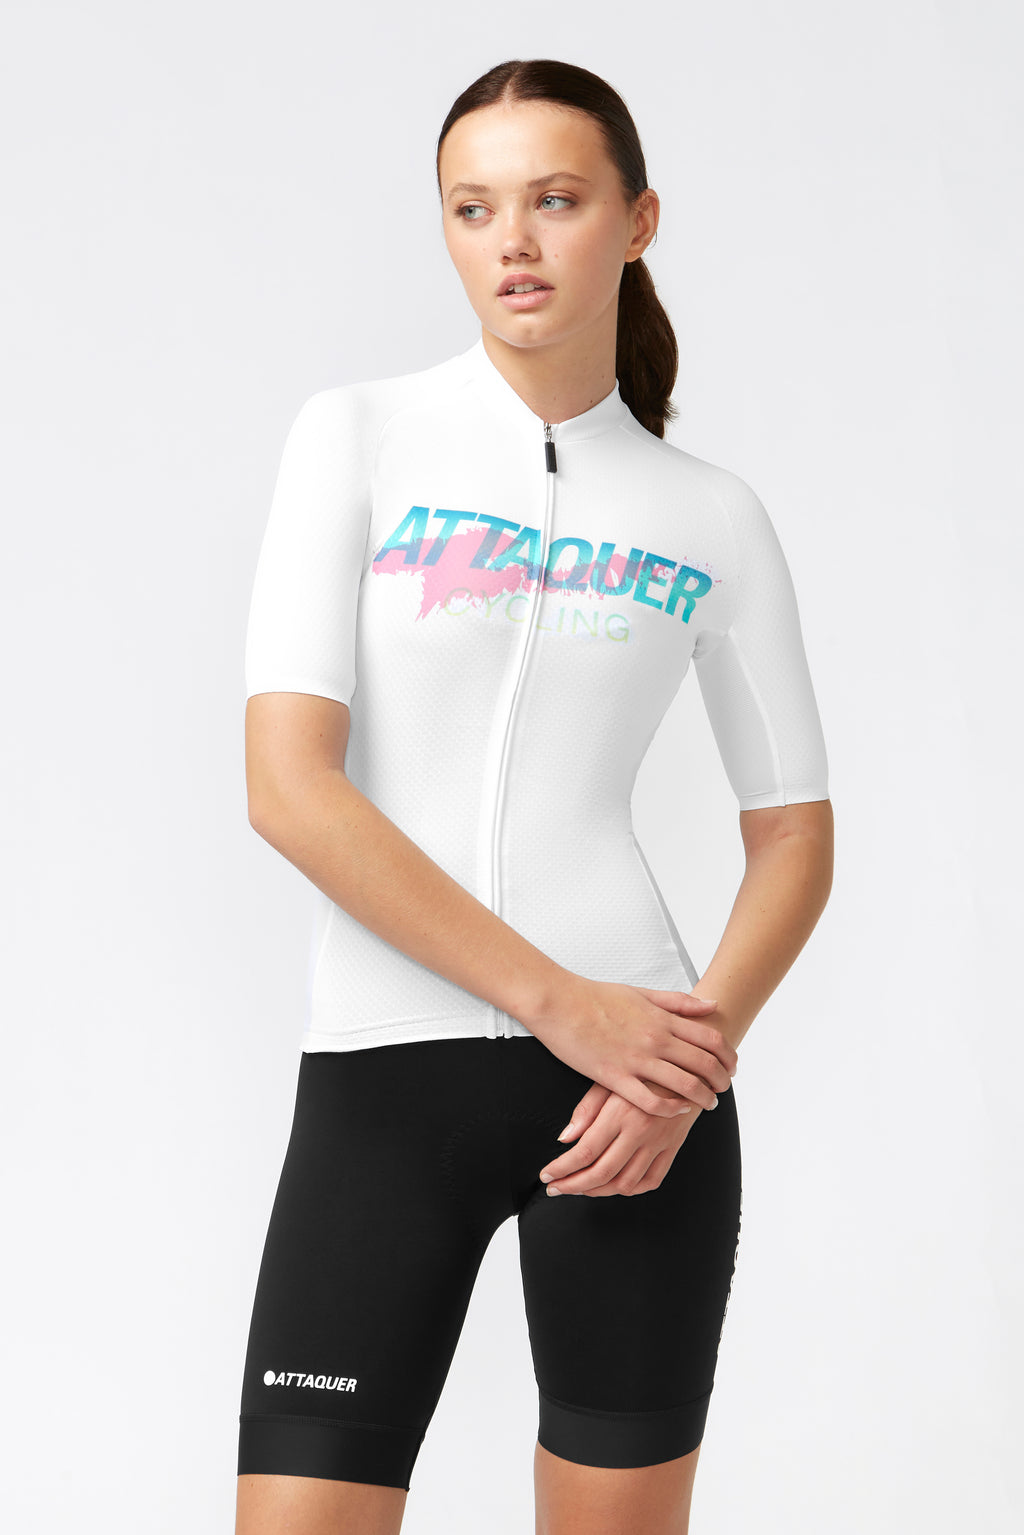 Women's All Day Overspray Jersey White/Teal/Dirty Pink